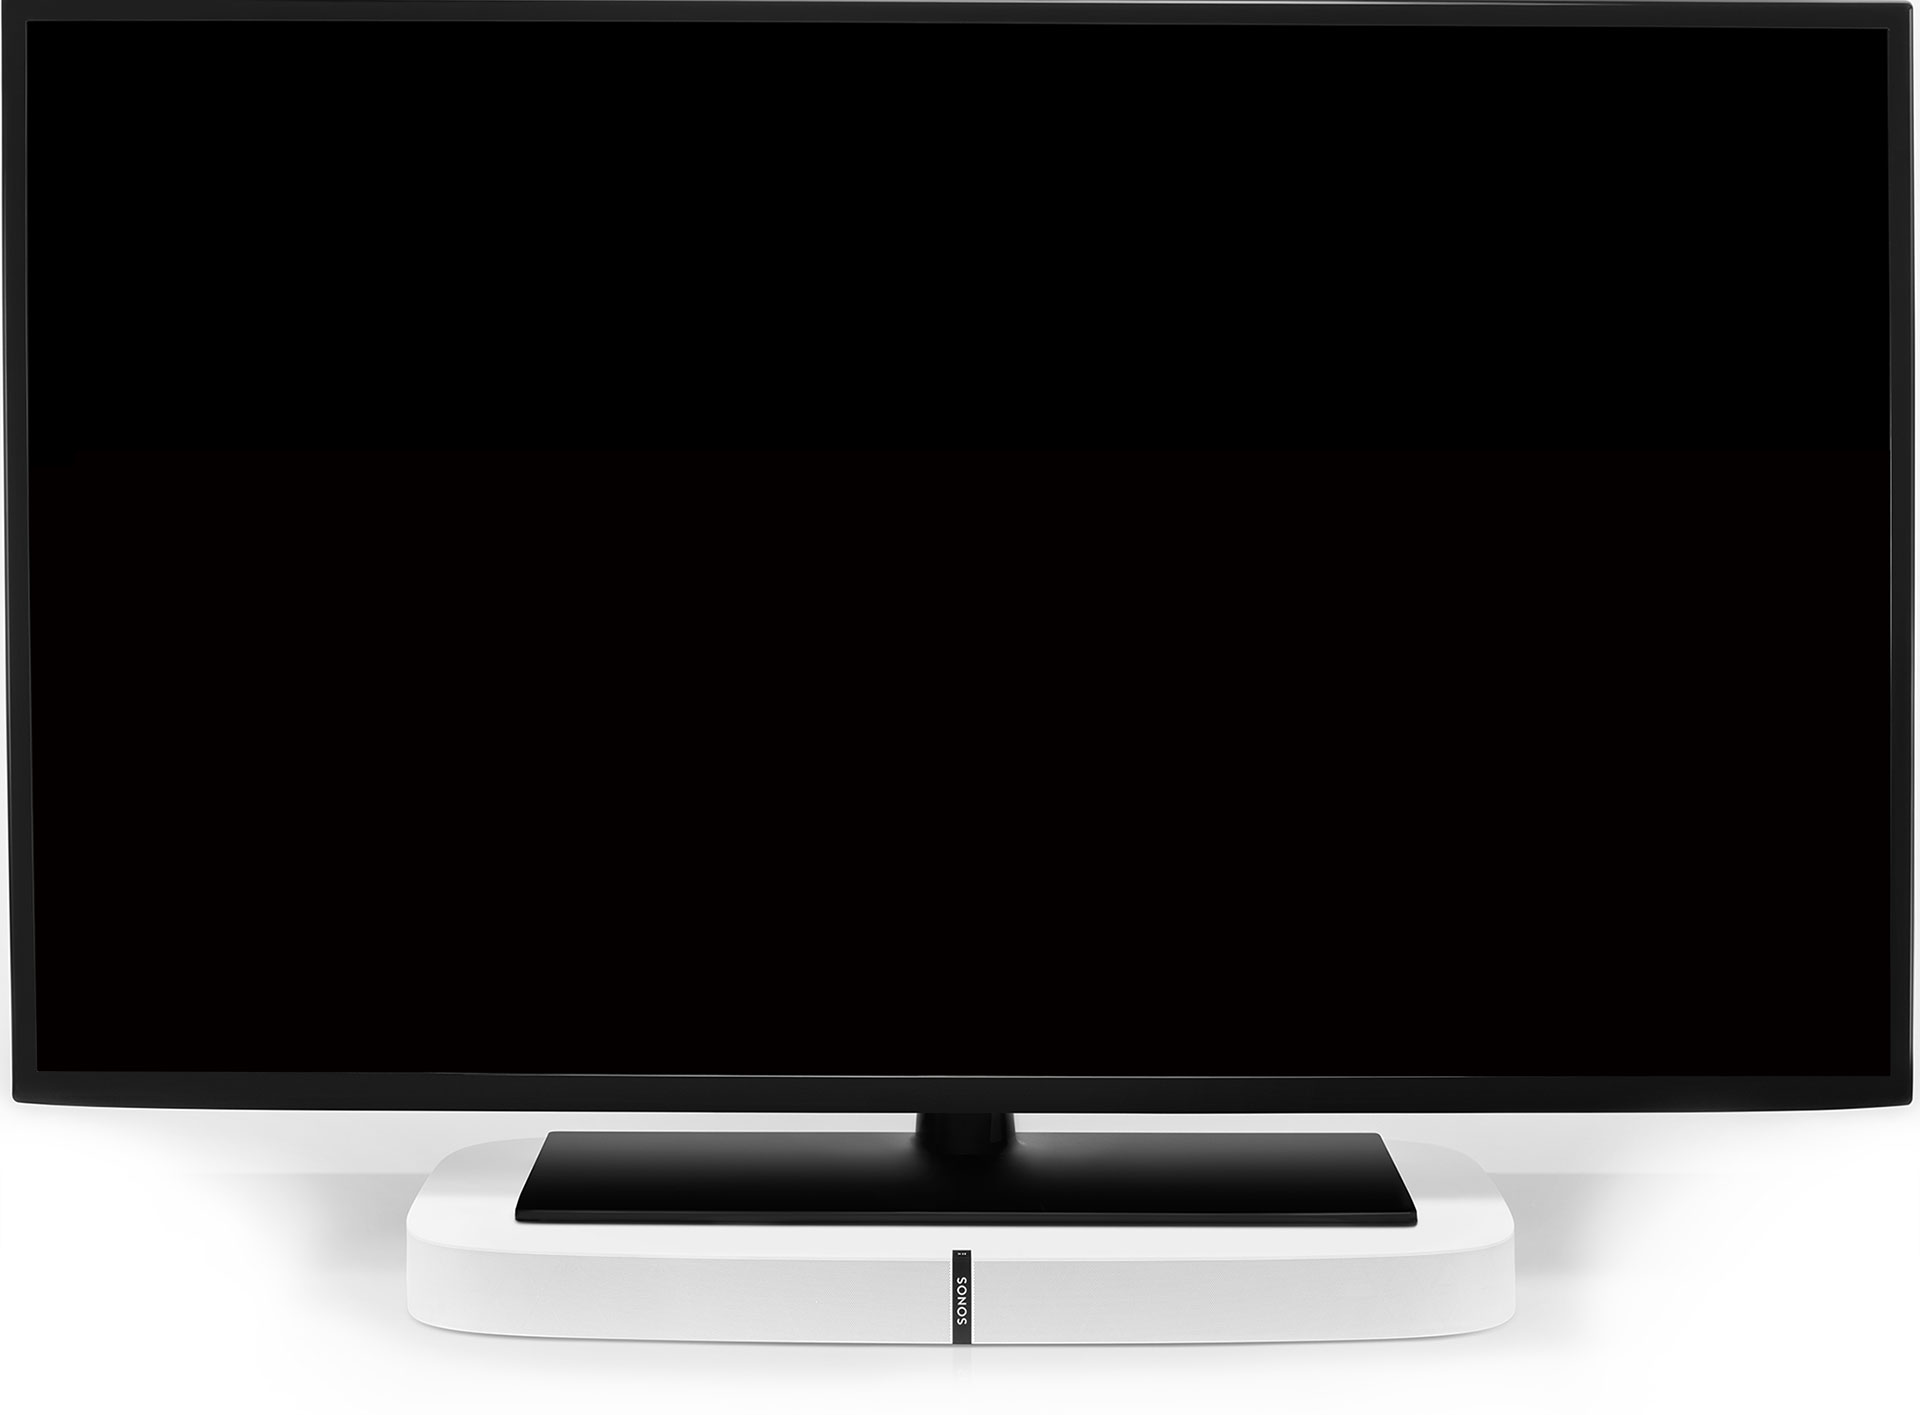 White PLAYBASE supporting a TV